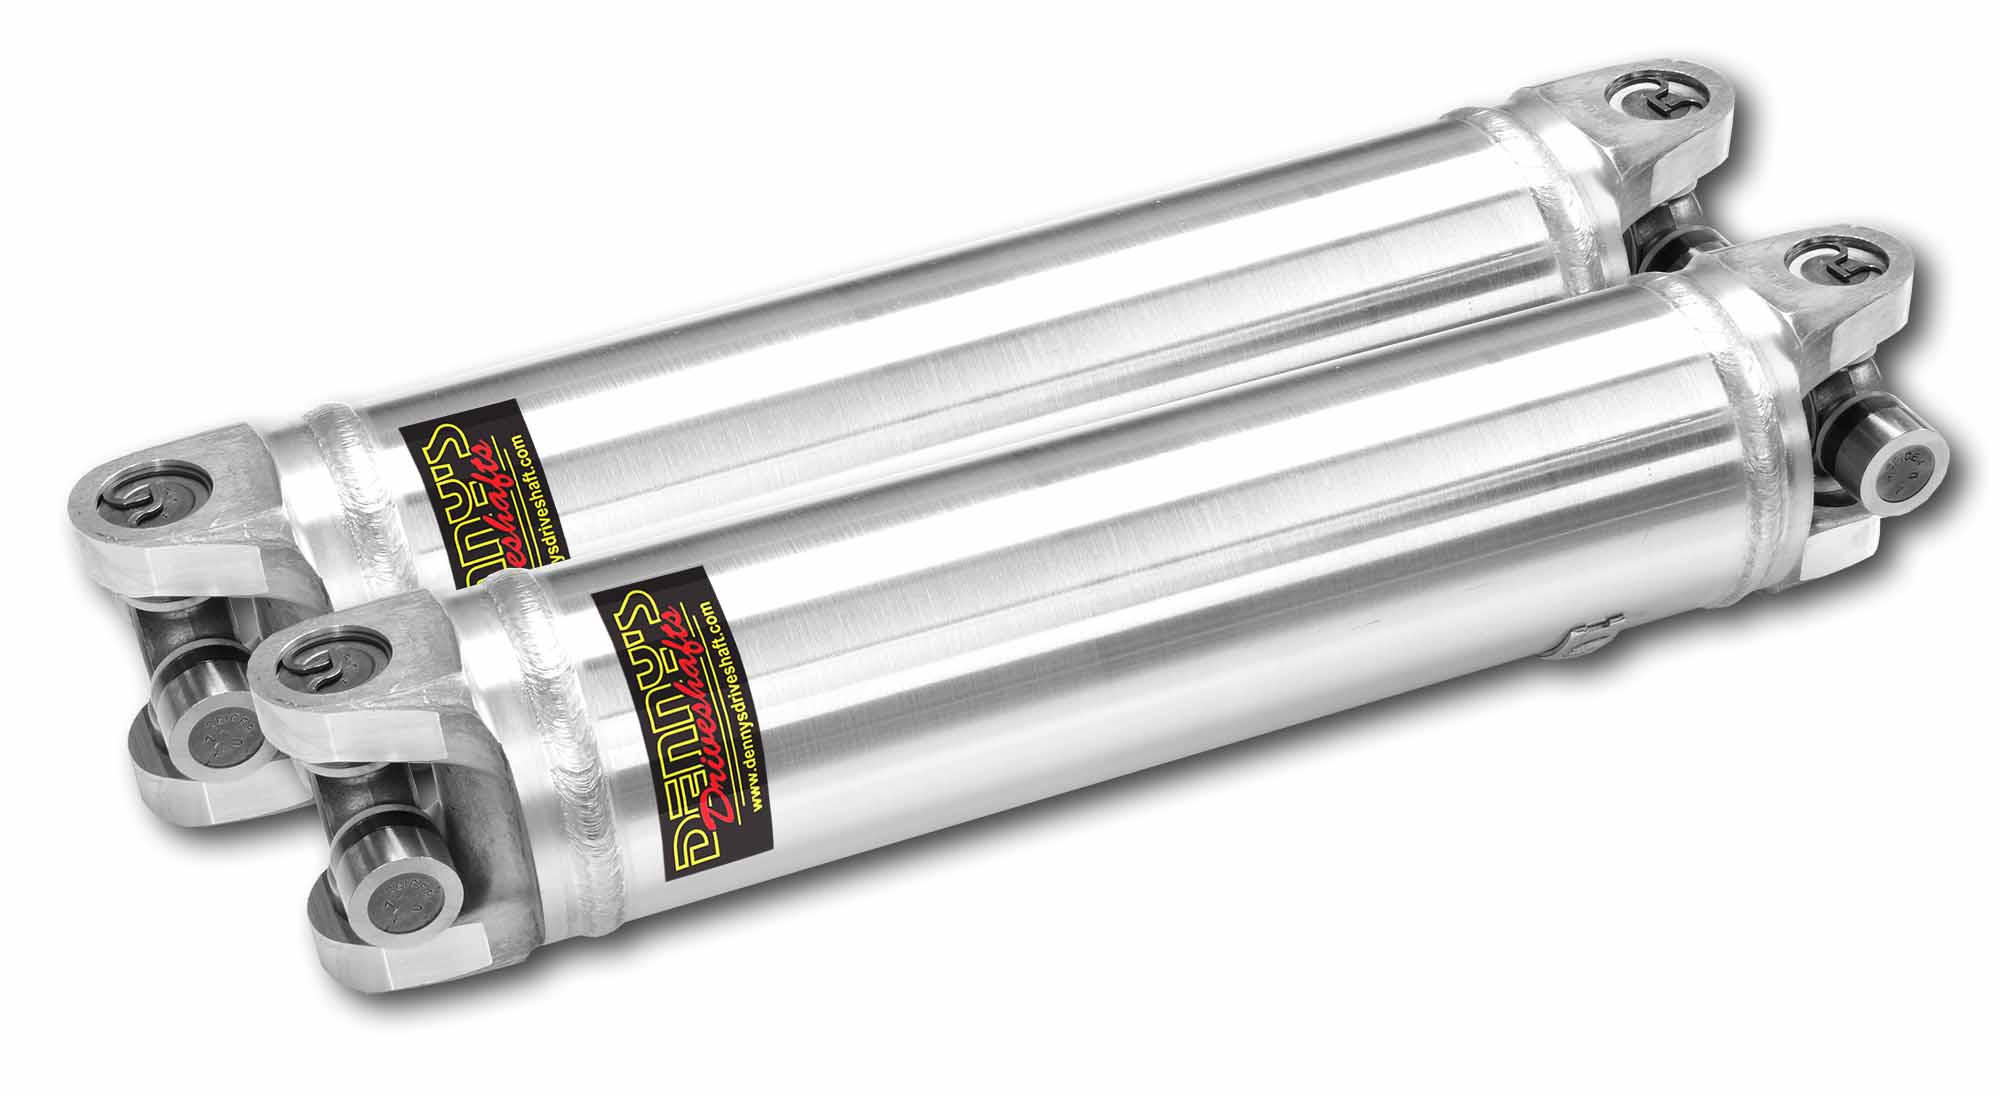 Denny's Aluminum Half Shafts for the C4 Corvette from 1984 to 1996